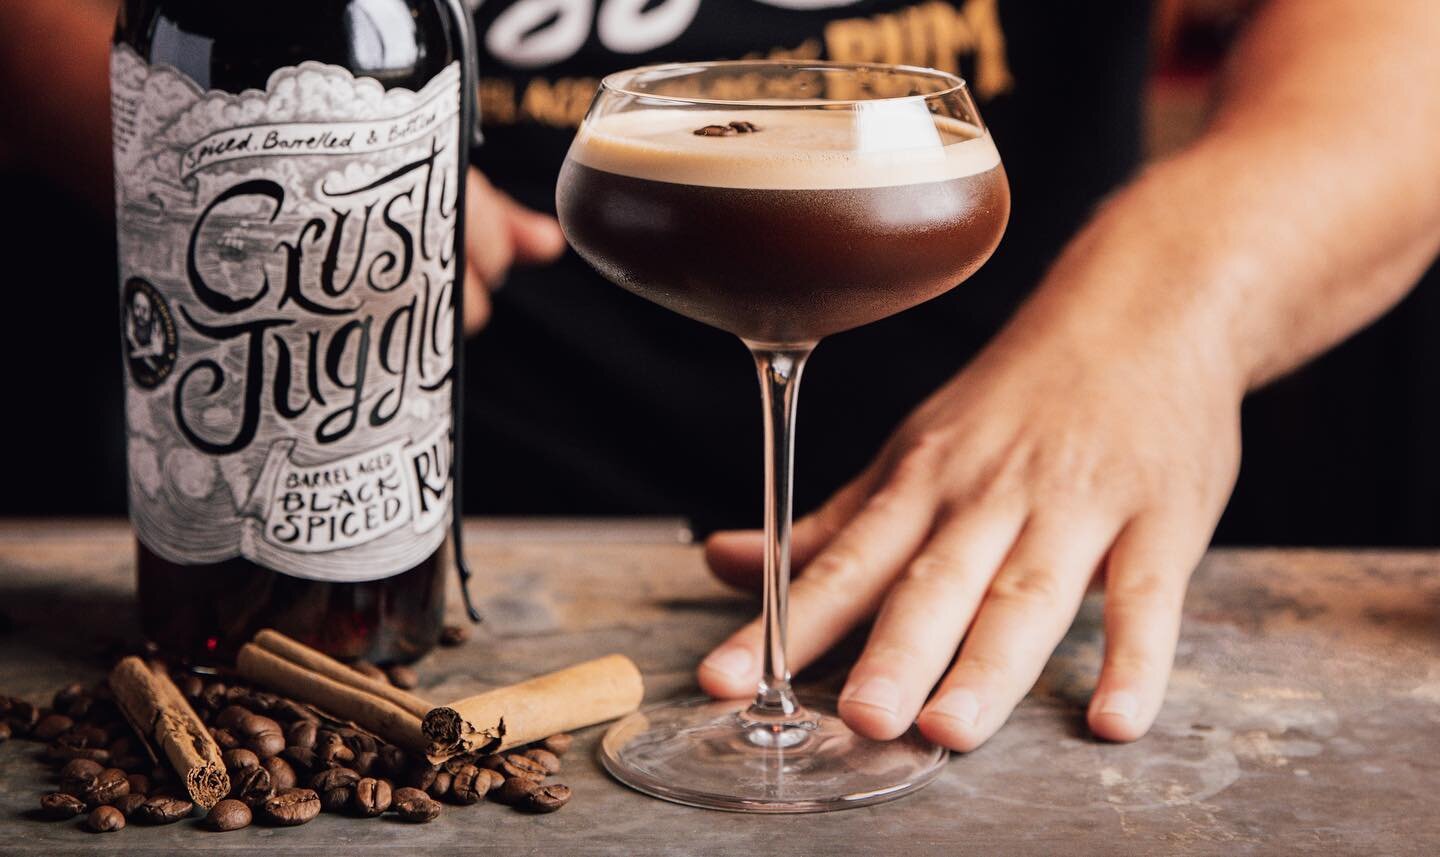 Do you fancy producing sexy cocktails like this in your establishment?! Do you want to see the look on a customer&rsquo;s face when they sample the delicious black nectar that is &lsquo;Crusty Juggler Rum&rsquo;?!

Well good news!! You can now have C